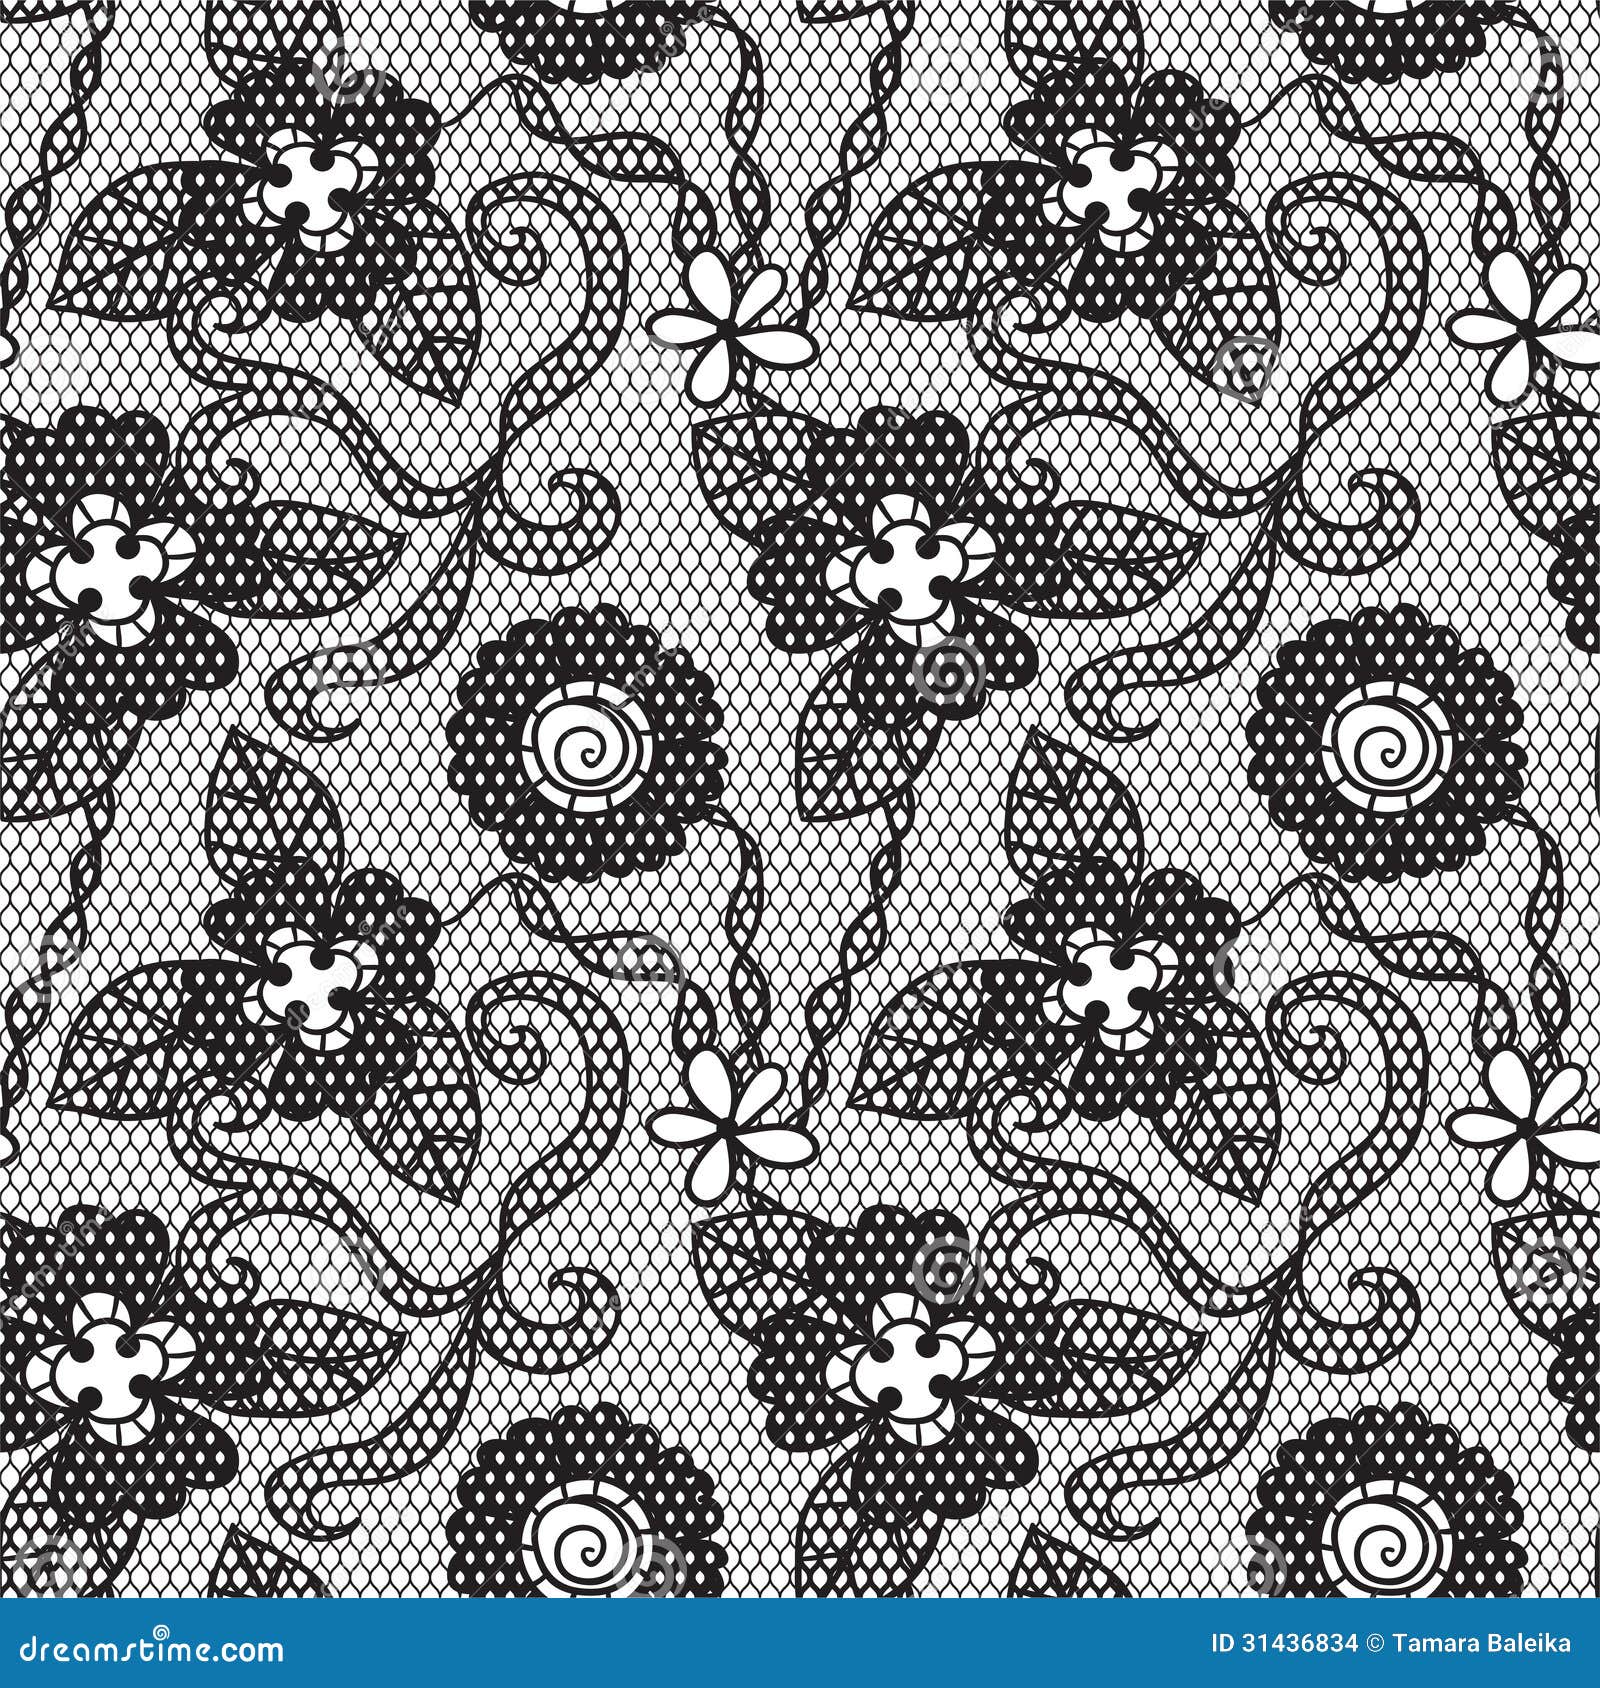 Lace Seamless Pattern with Flowers Stock Vector - Illustration of mesh ...